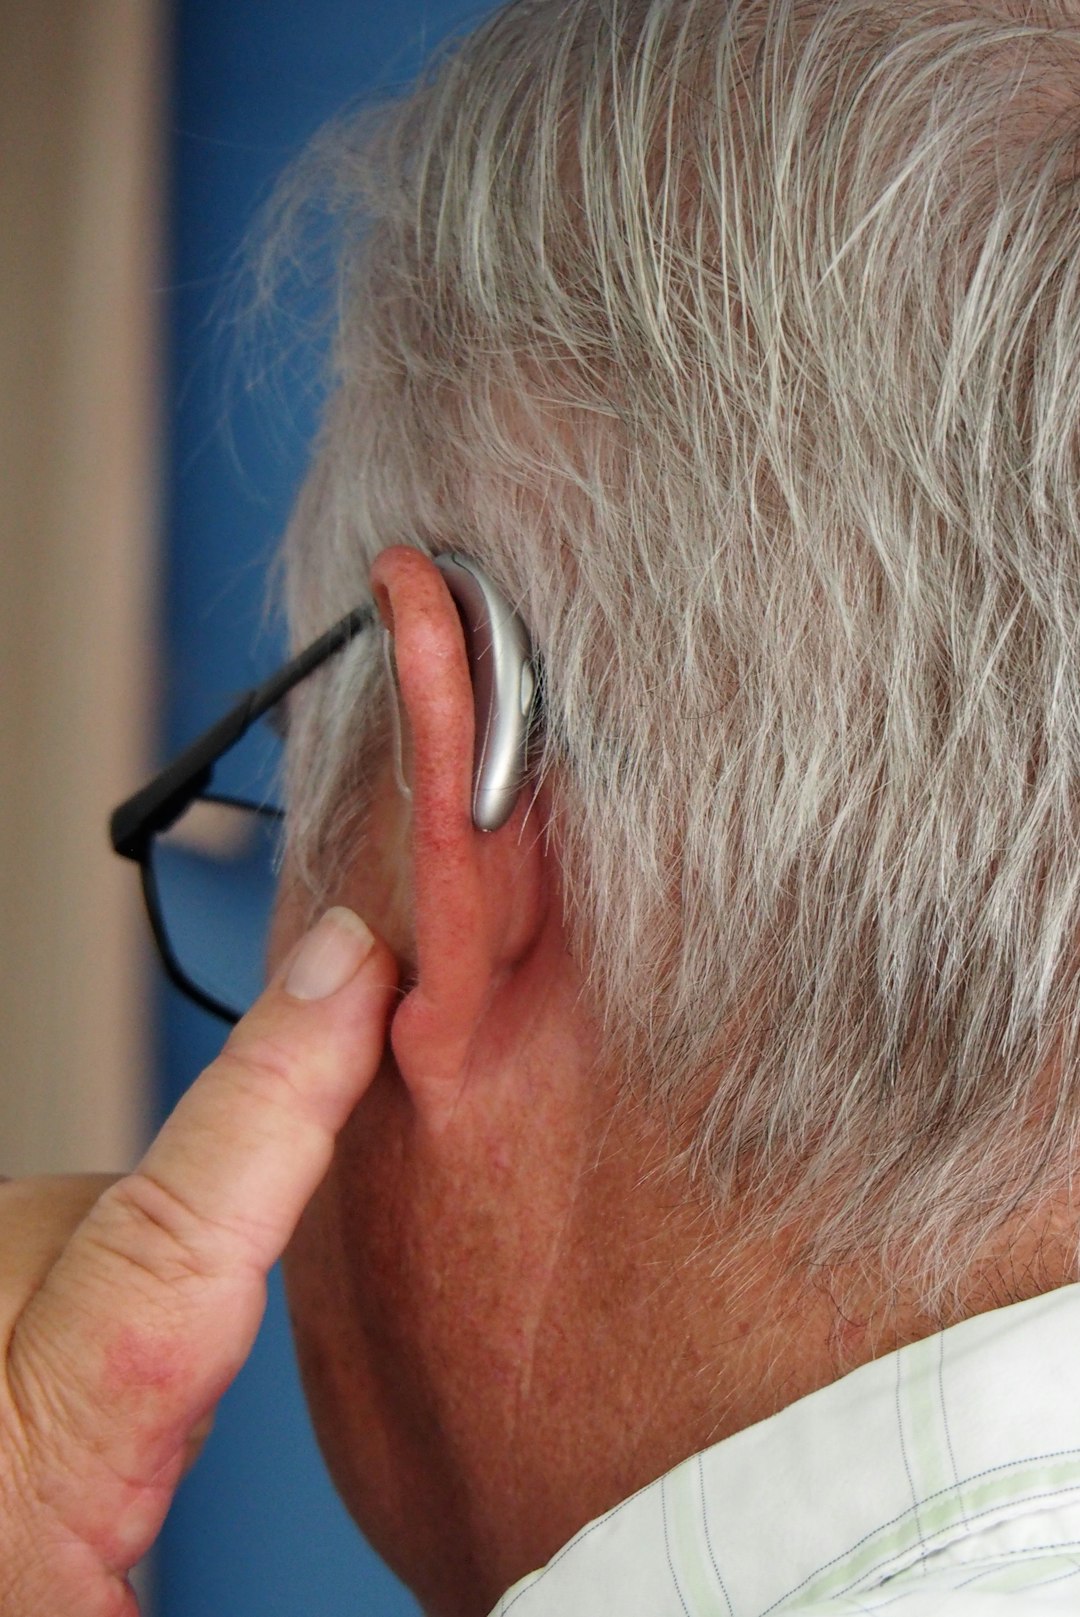 The Impact of Hearing Loss on Mental Health